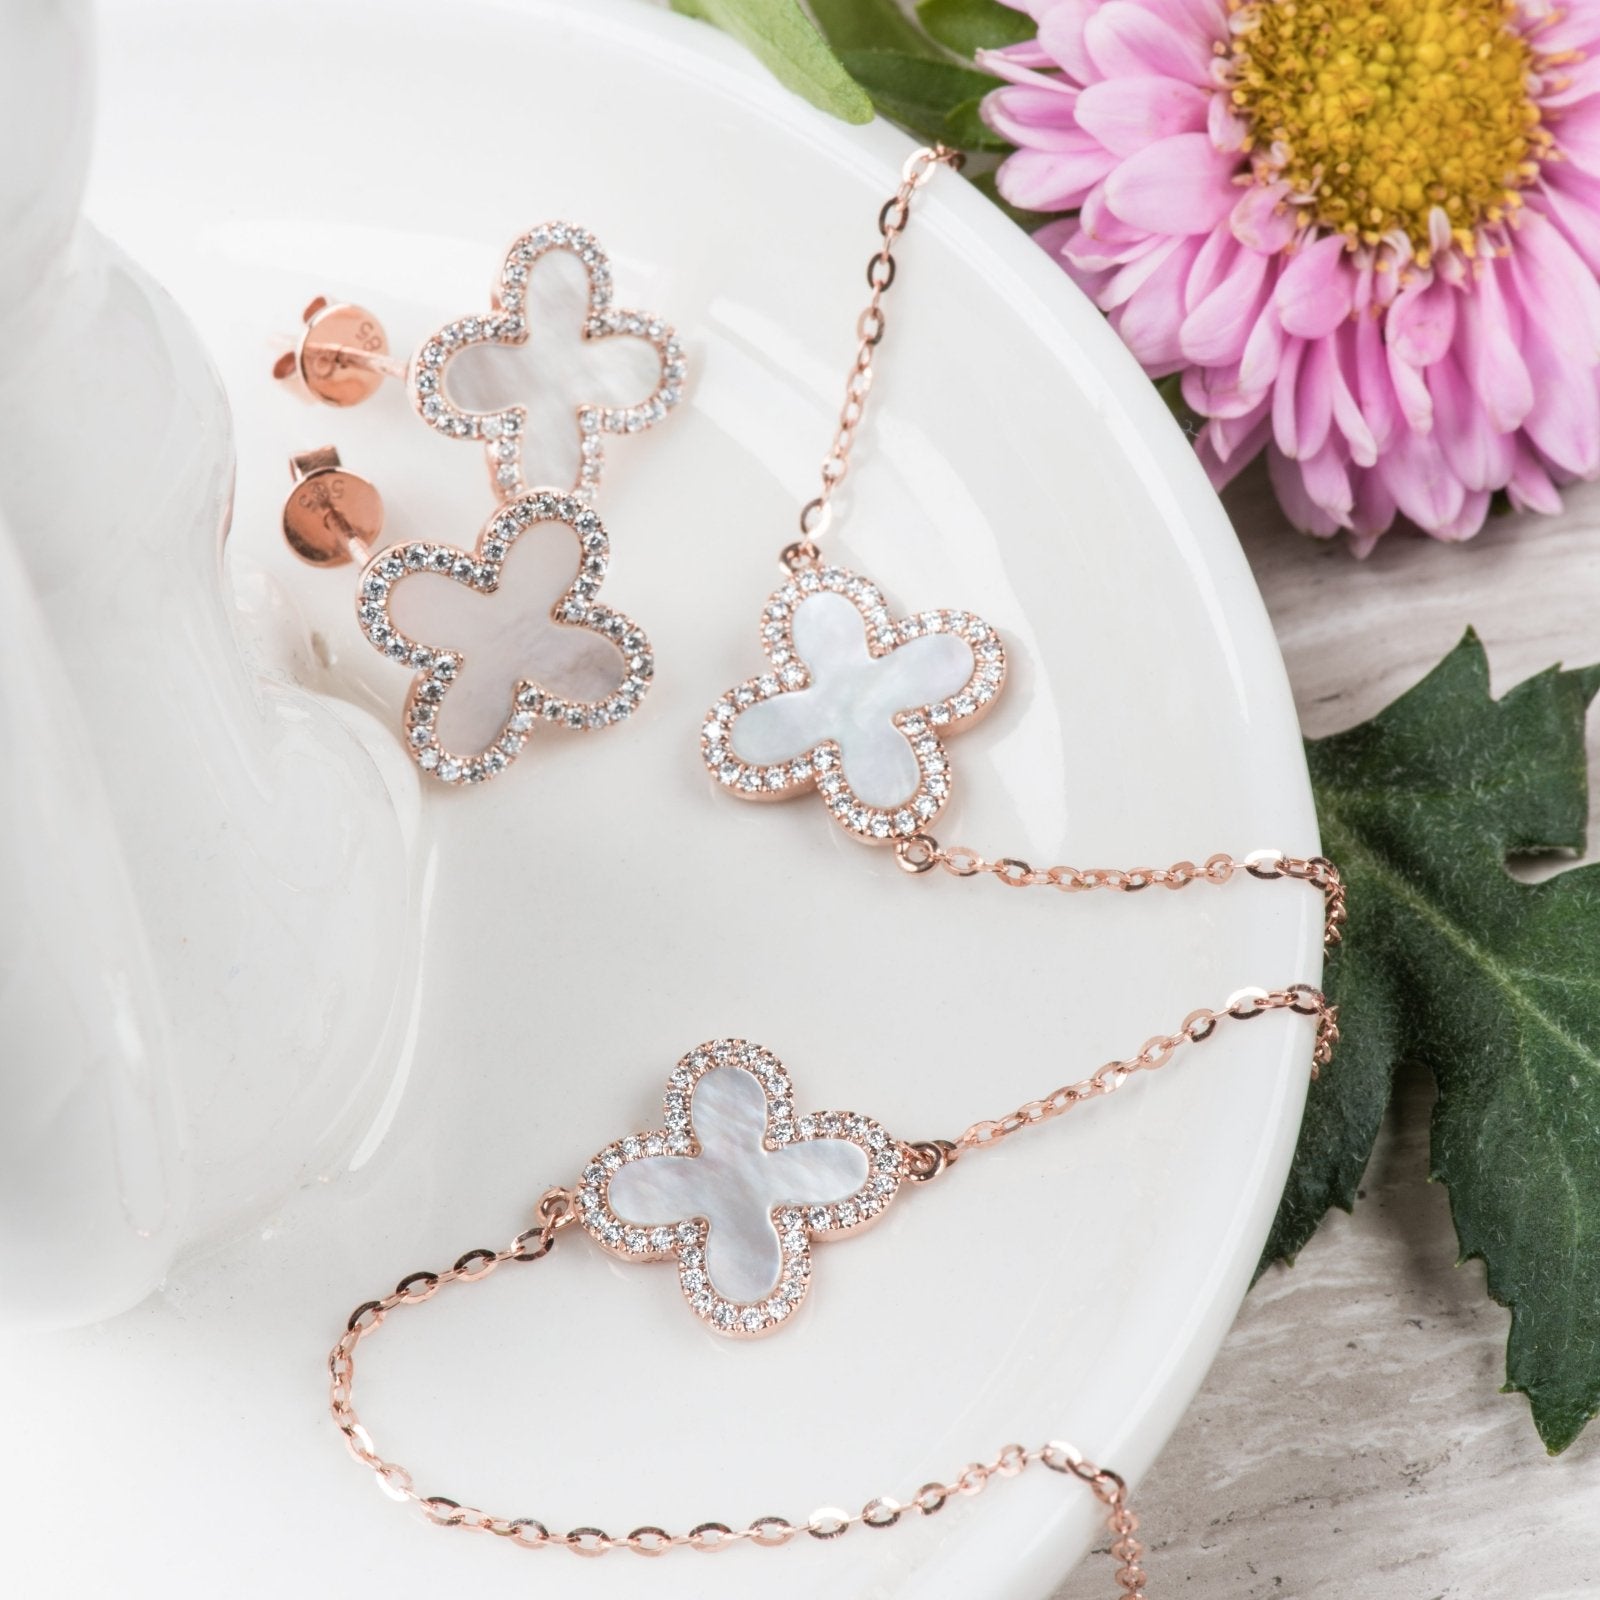 Mother of Pearl Clover with Diamonds Station Necklace Necklaces Estella Collection #product_description# 17228 14k Birthstone Diamond #tag4# #tag5# #tag6# #tag7# #tag8# #tag9# #tag10#